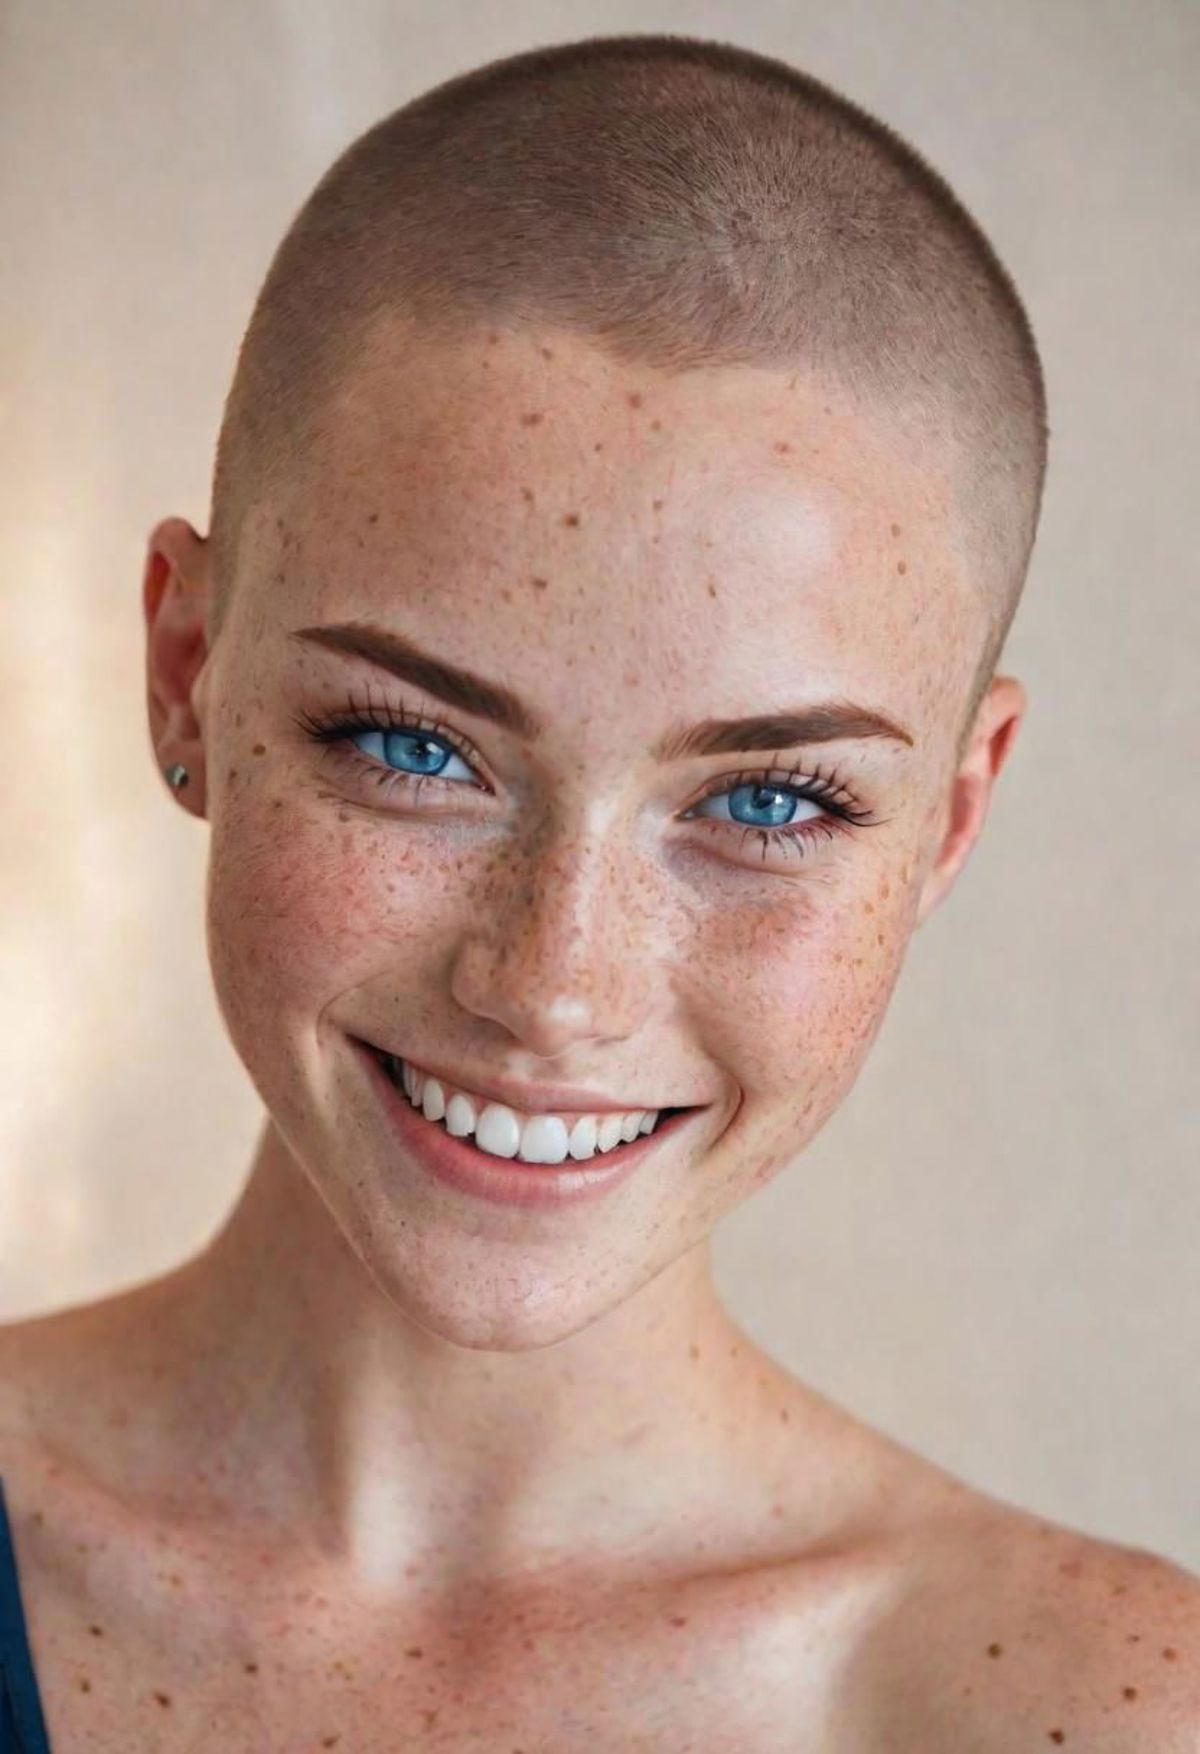 A young woman with a shaved head and blue eyes is smiling for the camera.